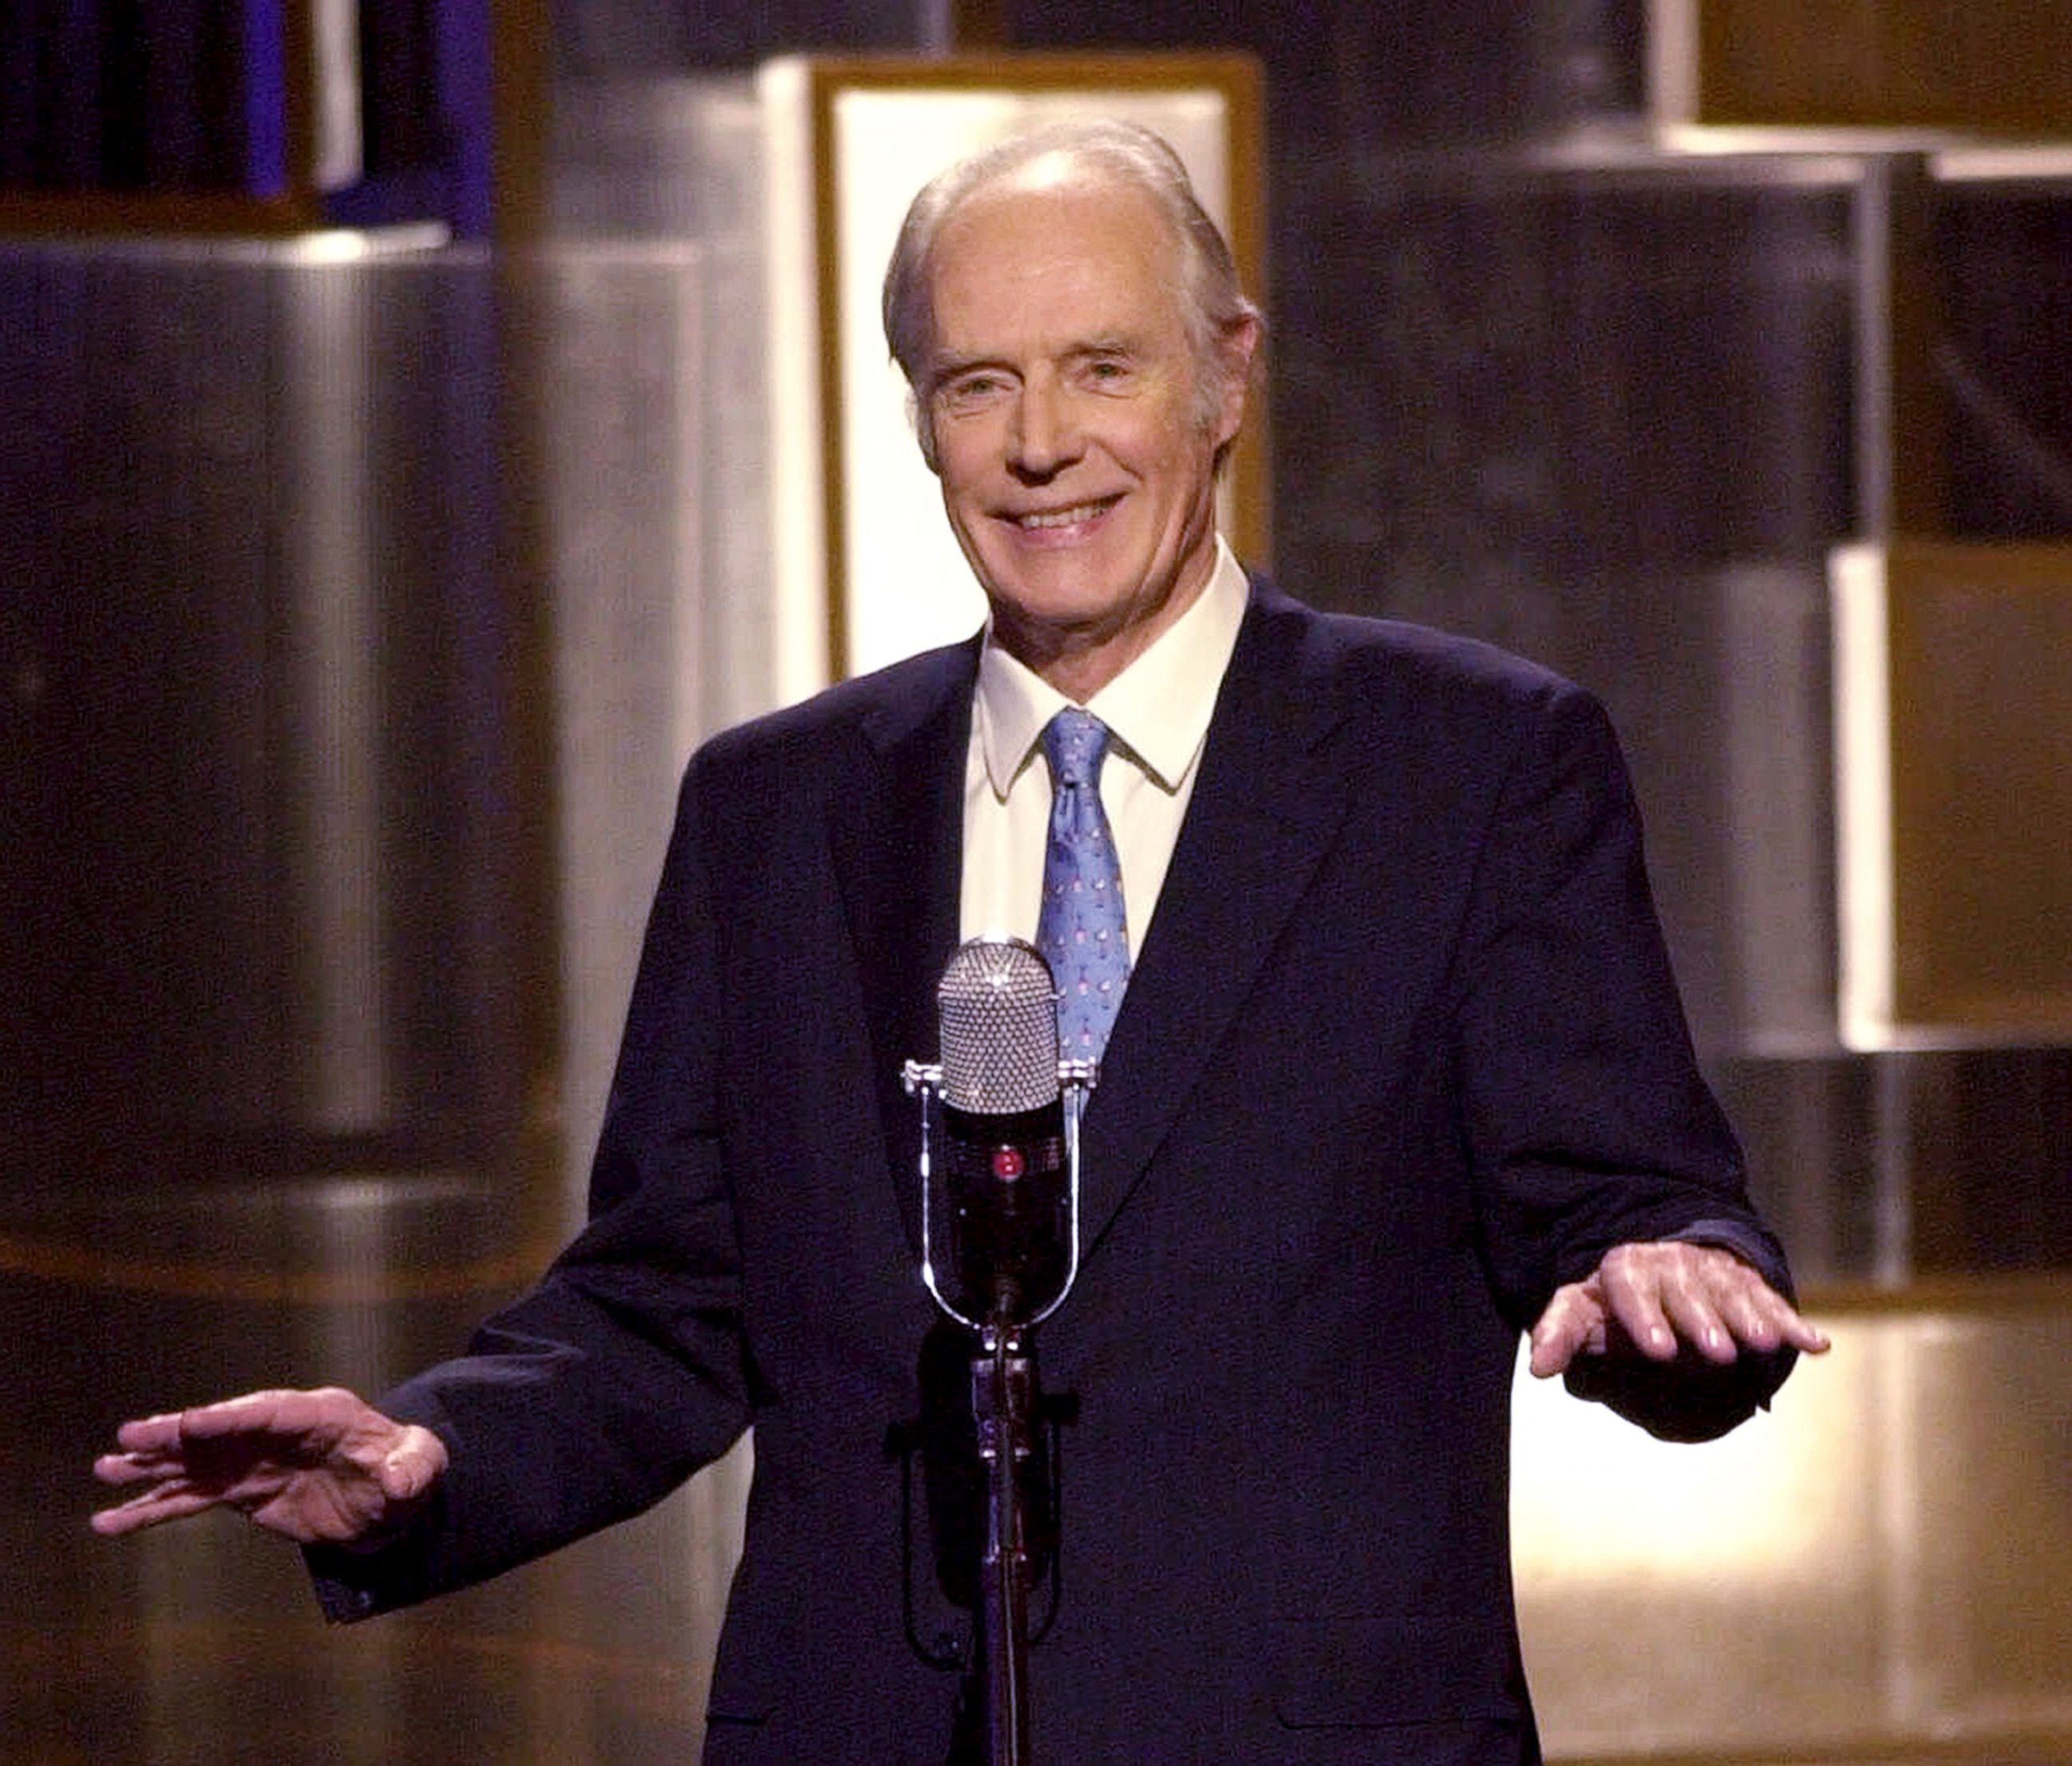 PHOTO: Sir George Martin, the Beatles producer, makes an appearance during "An All-Star Tribute to Brian Wilson" concert at New York's Radio City Music Hall in this March 29, 2001 file photo.